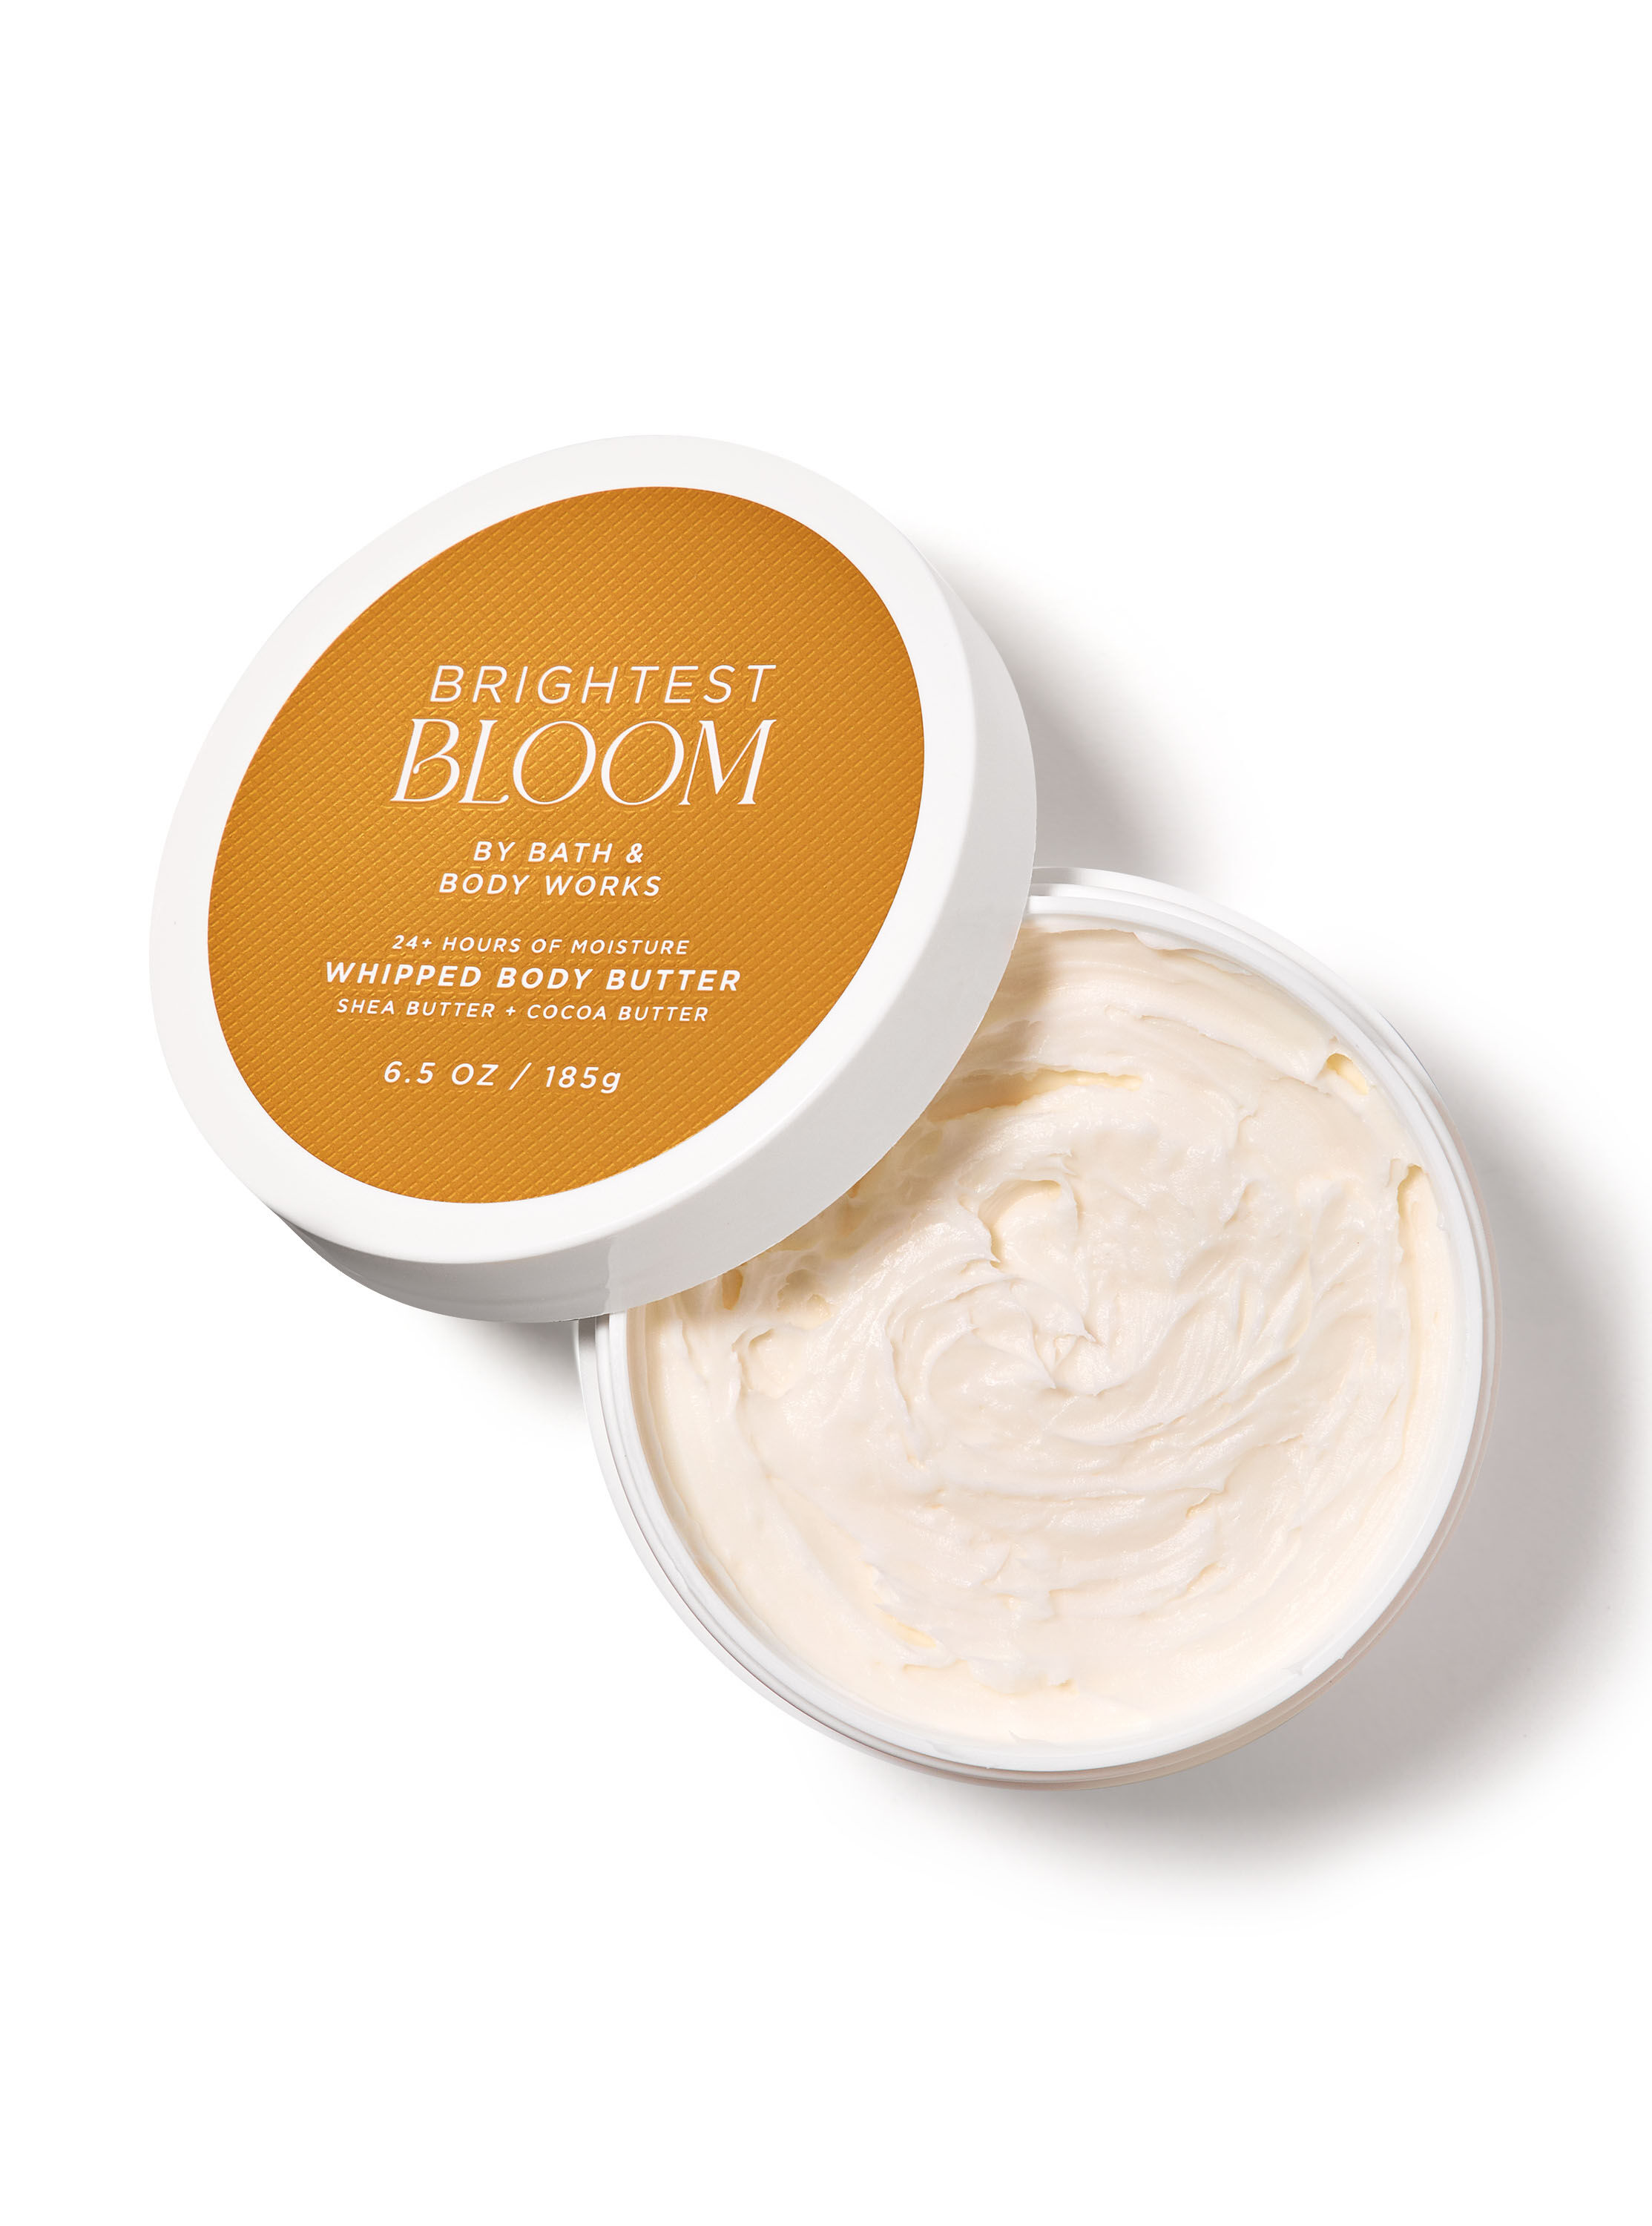 Brightest Bloom Whipped Body Butter